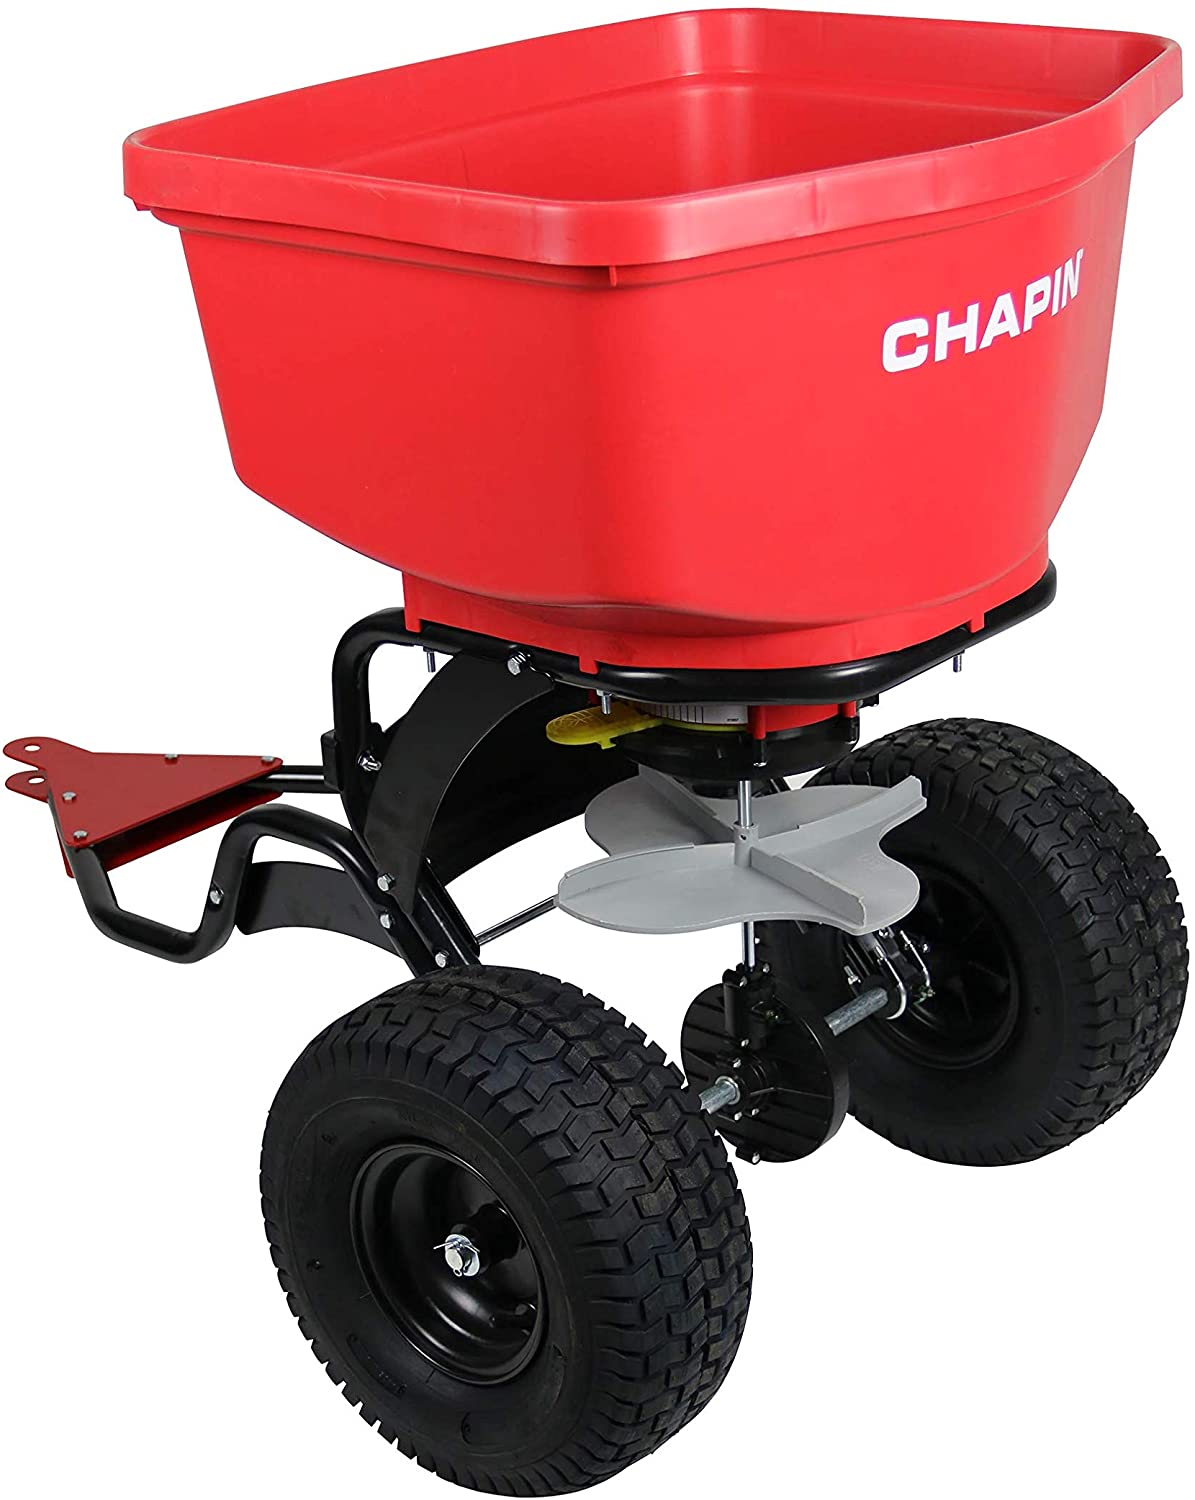 Chapin 8620B Tow Behind Spreader